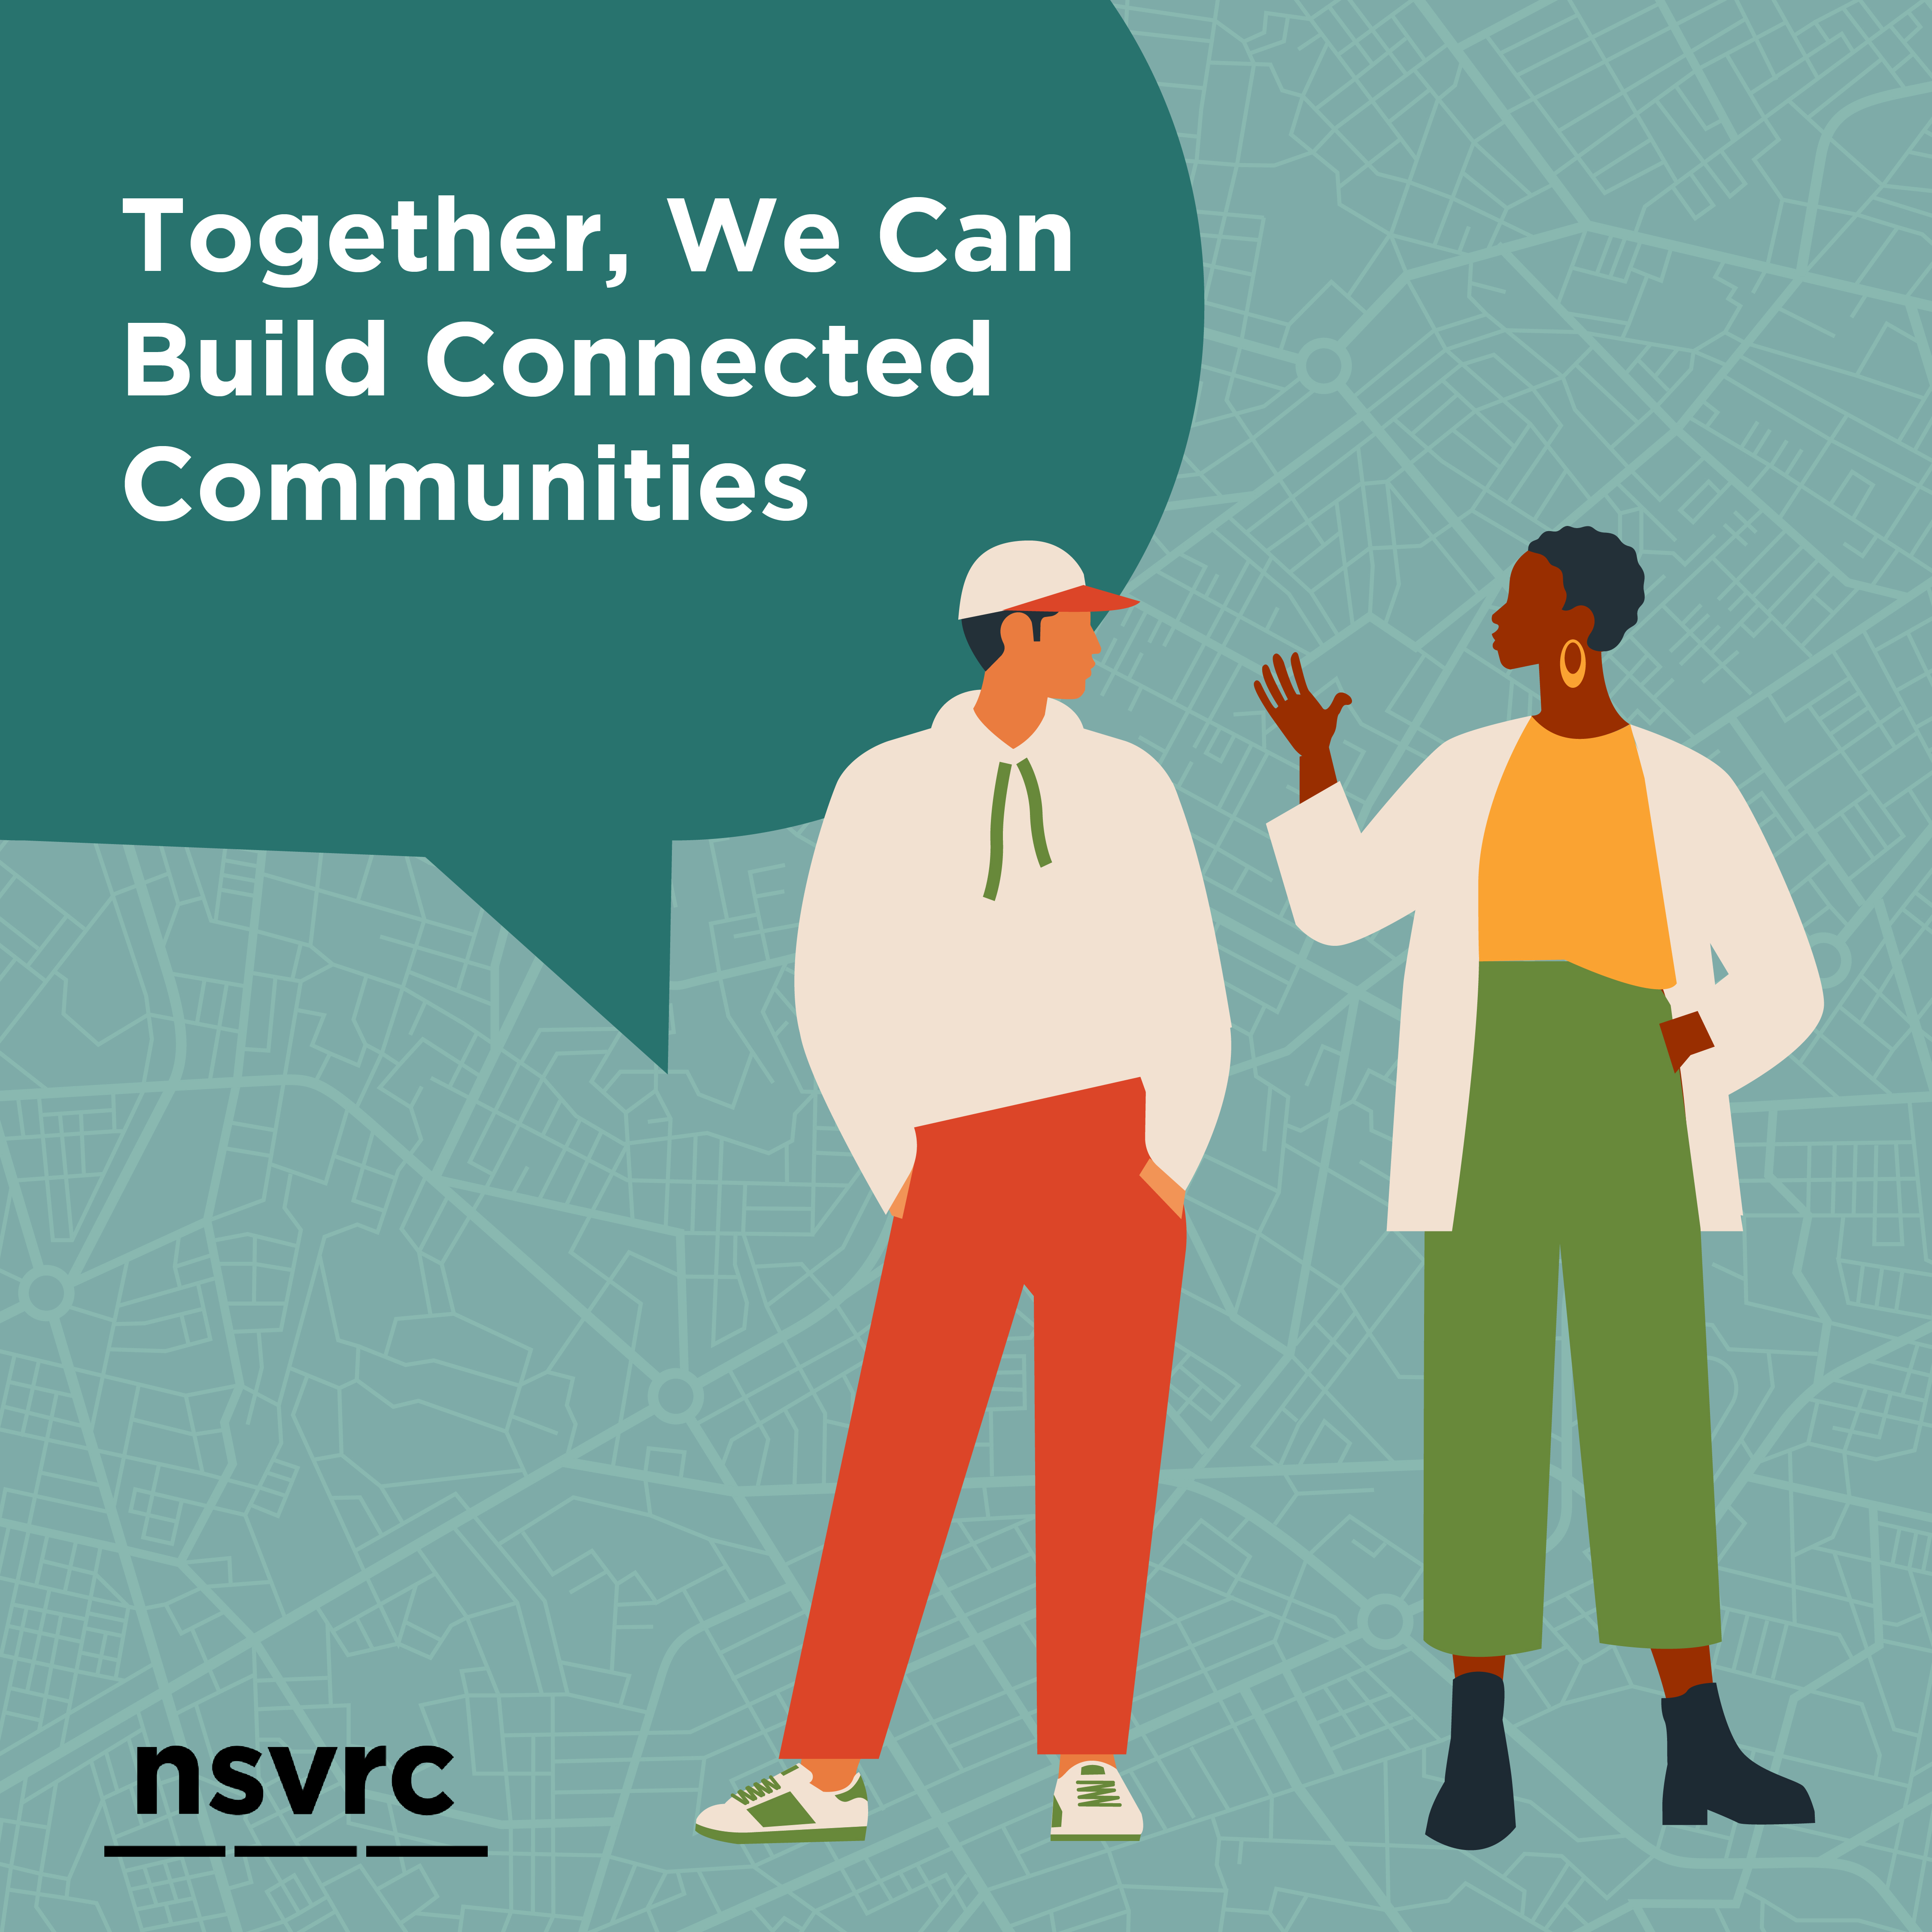 Together, we can build connected communities